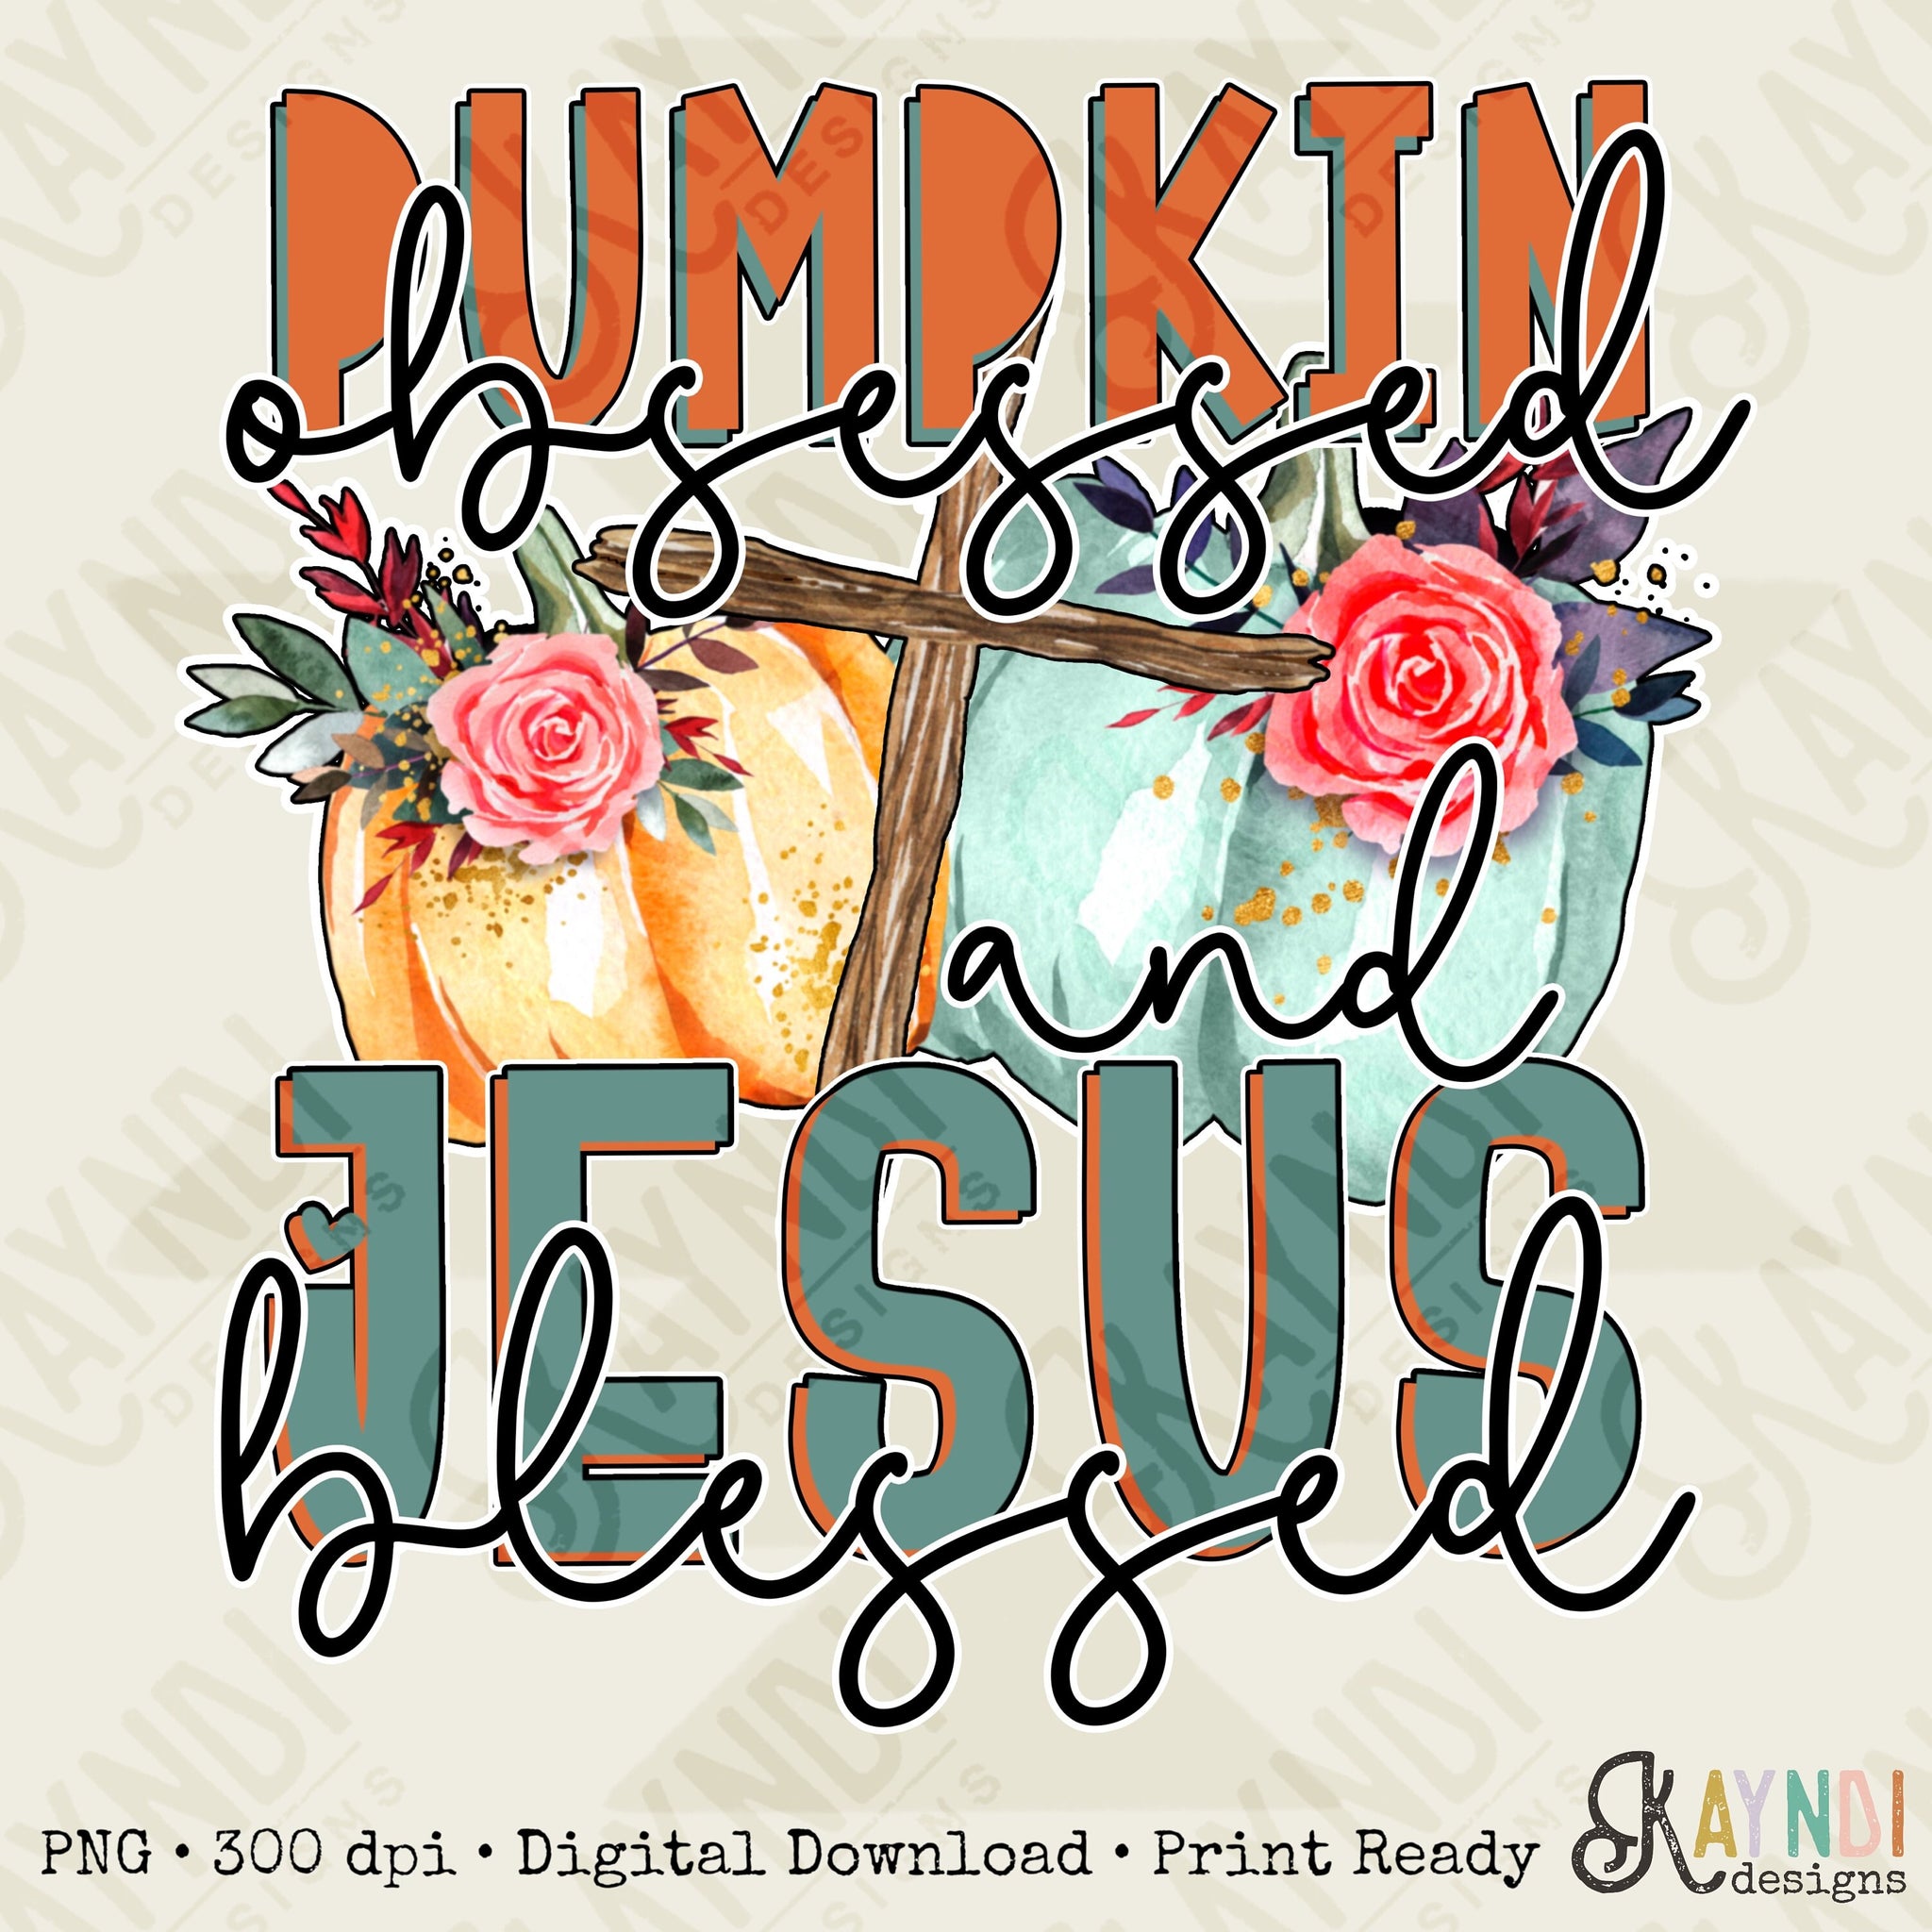 Pumpkin Obsessed and Jesus Blessed Sublimation Design PNG Digital Download Printable Faith Fall Christian Cross Floral Autumn Blessing